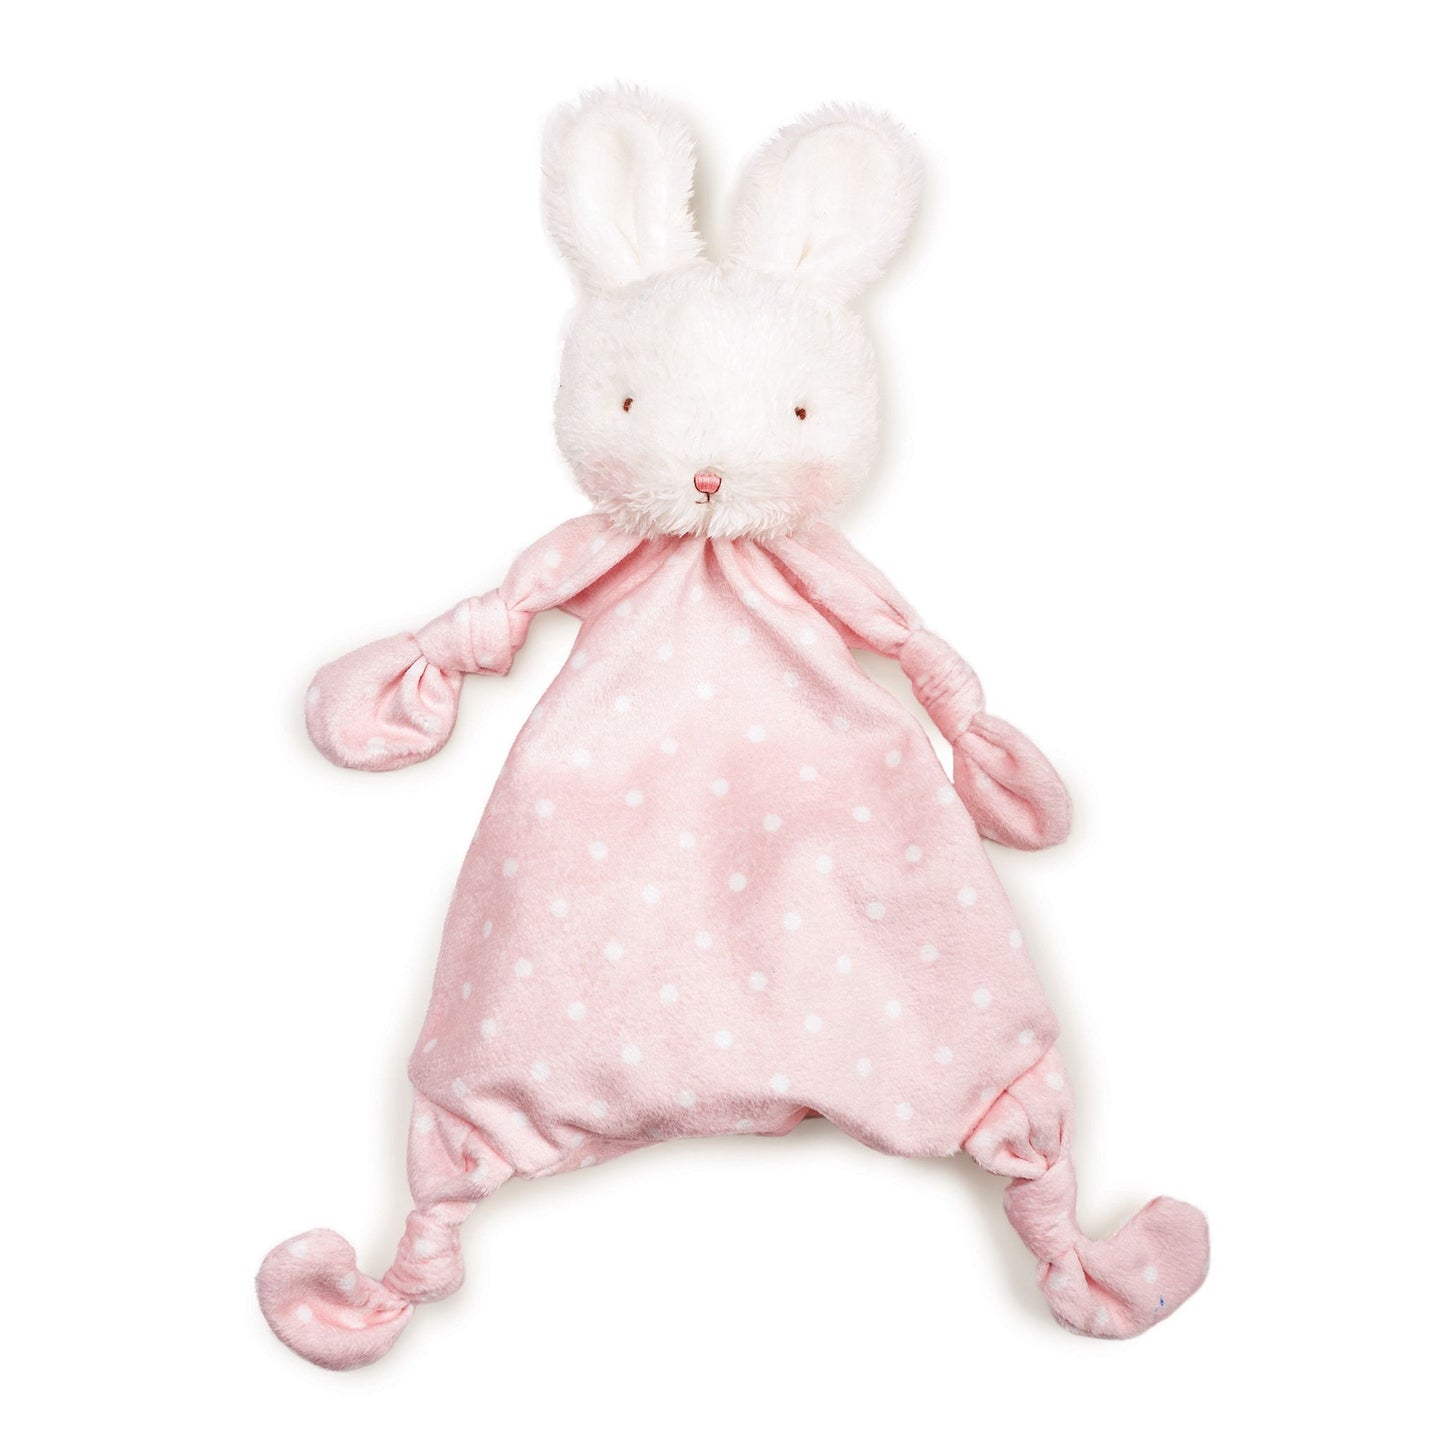 Bunnies by the bay polka dot Knotted plush lovey baby toy pink bunny or blue puppy